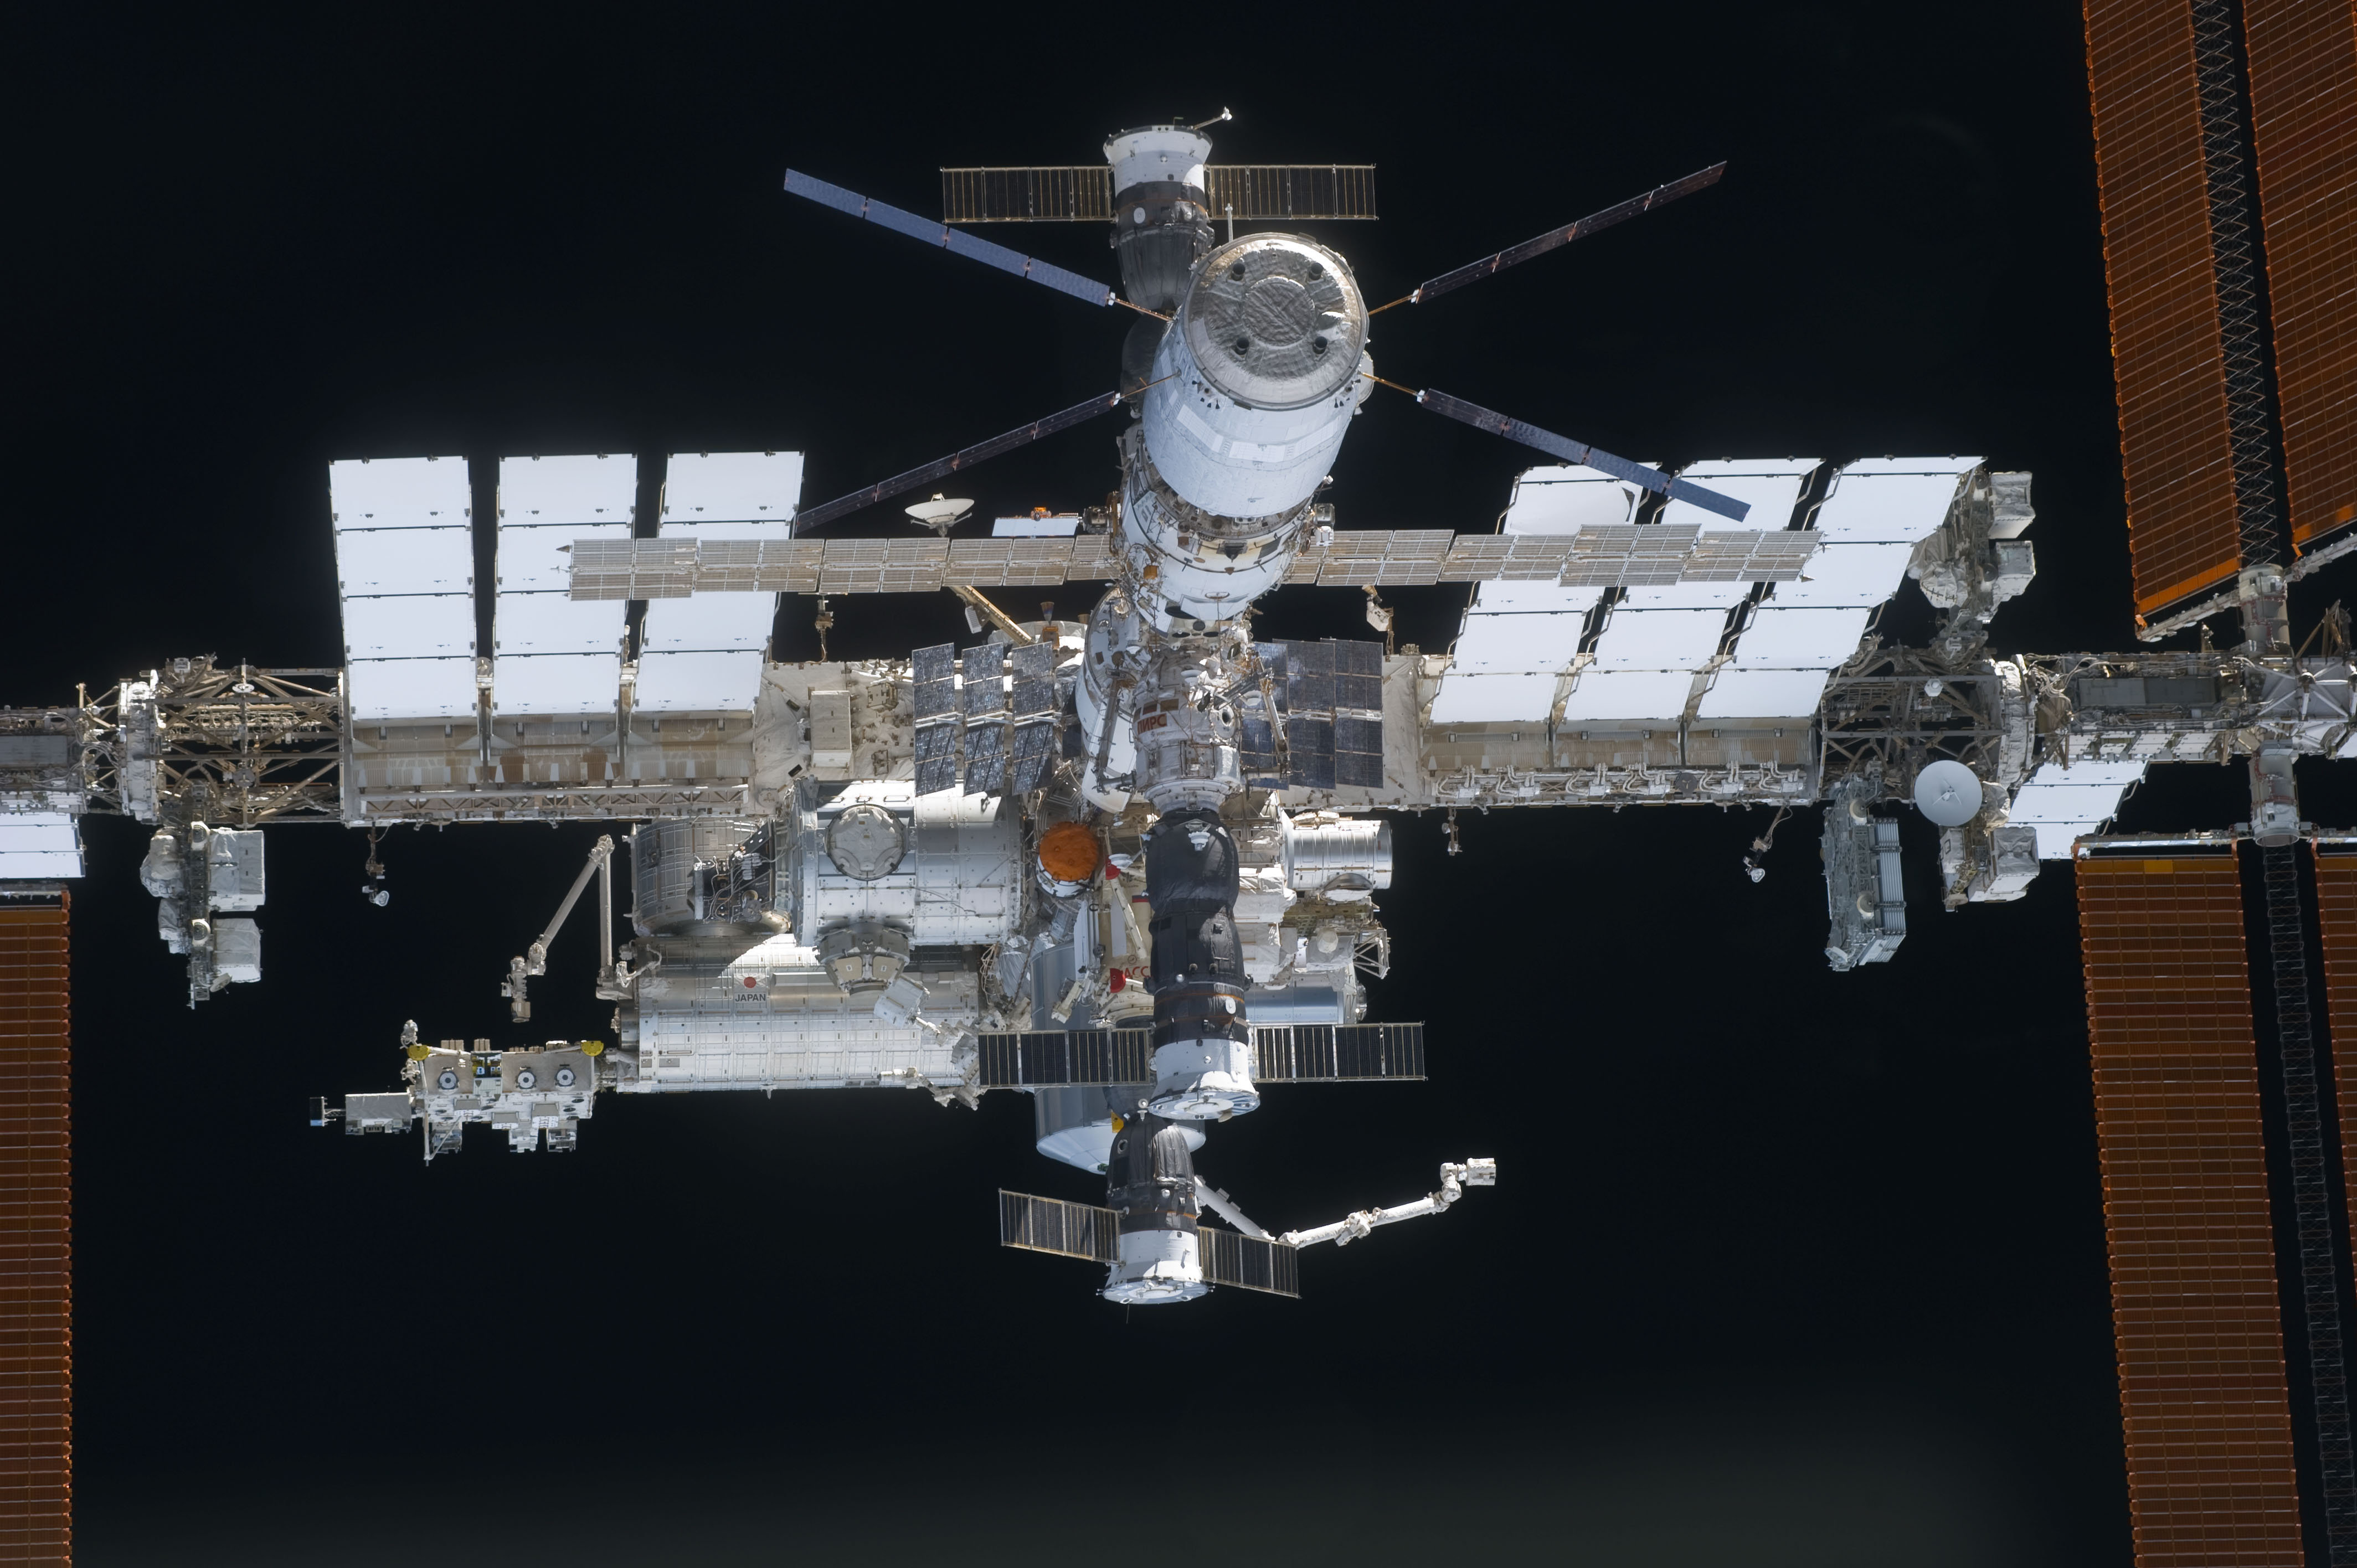 STS-133 International Space Station after undocking (close-up)